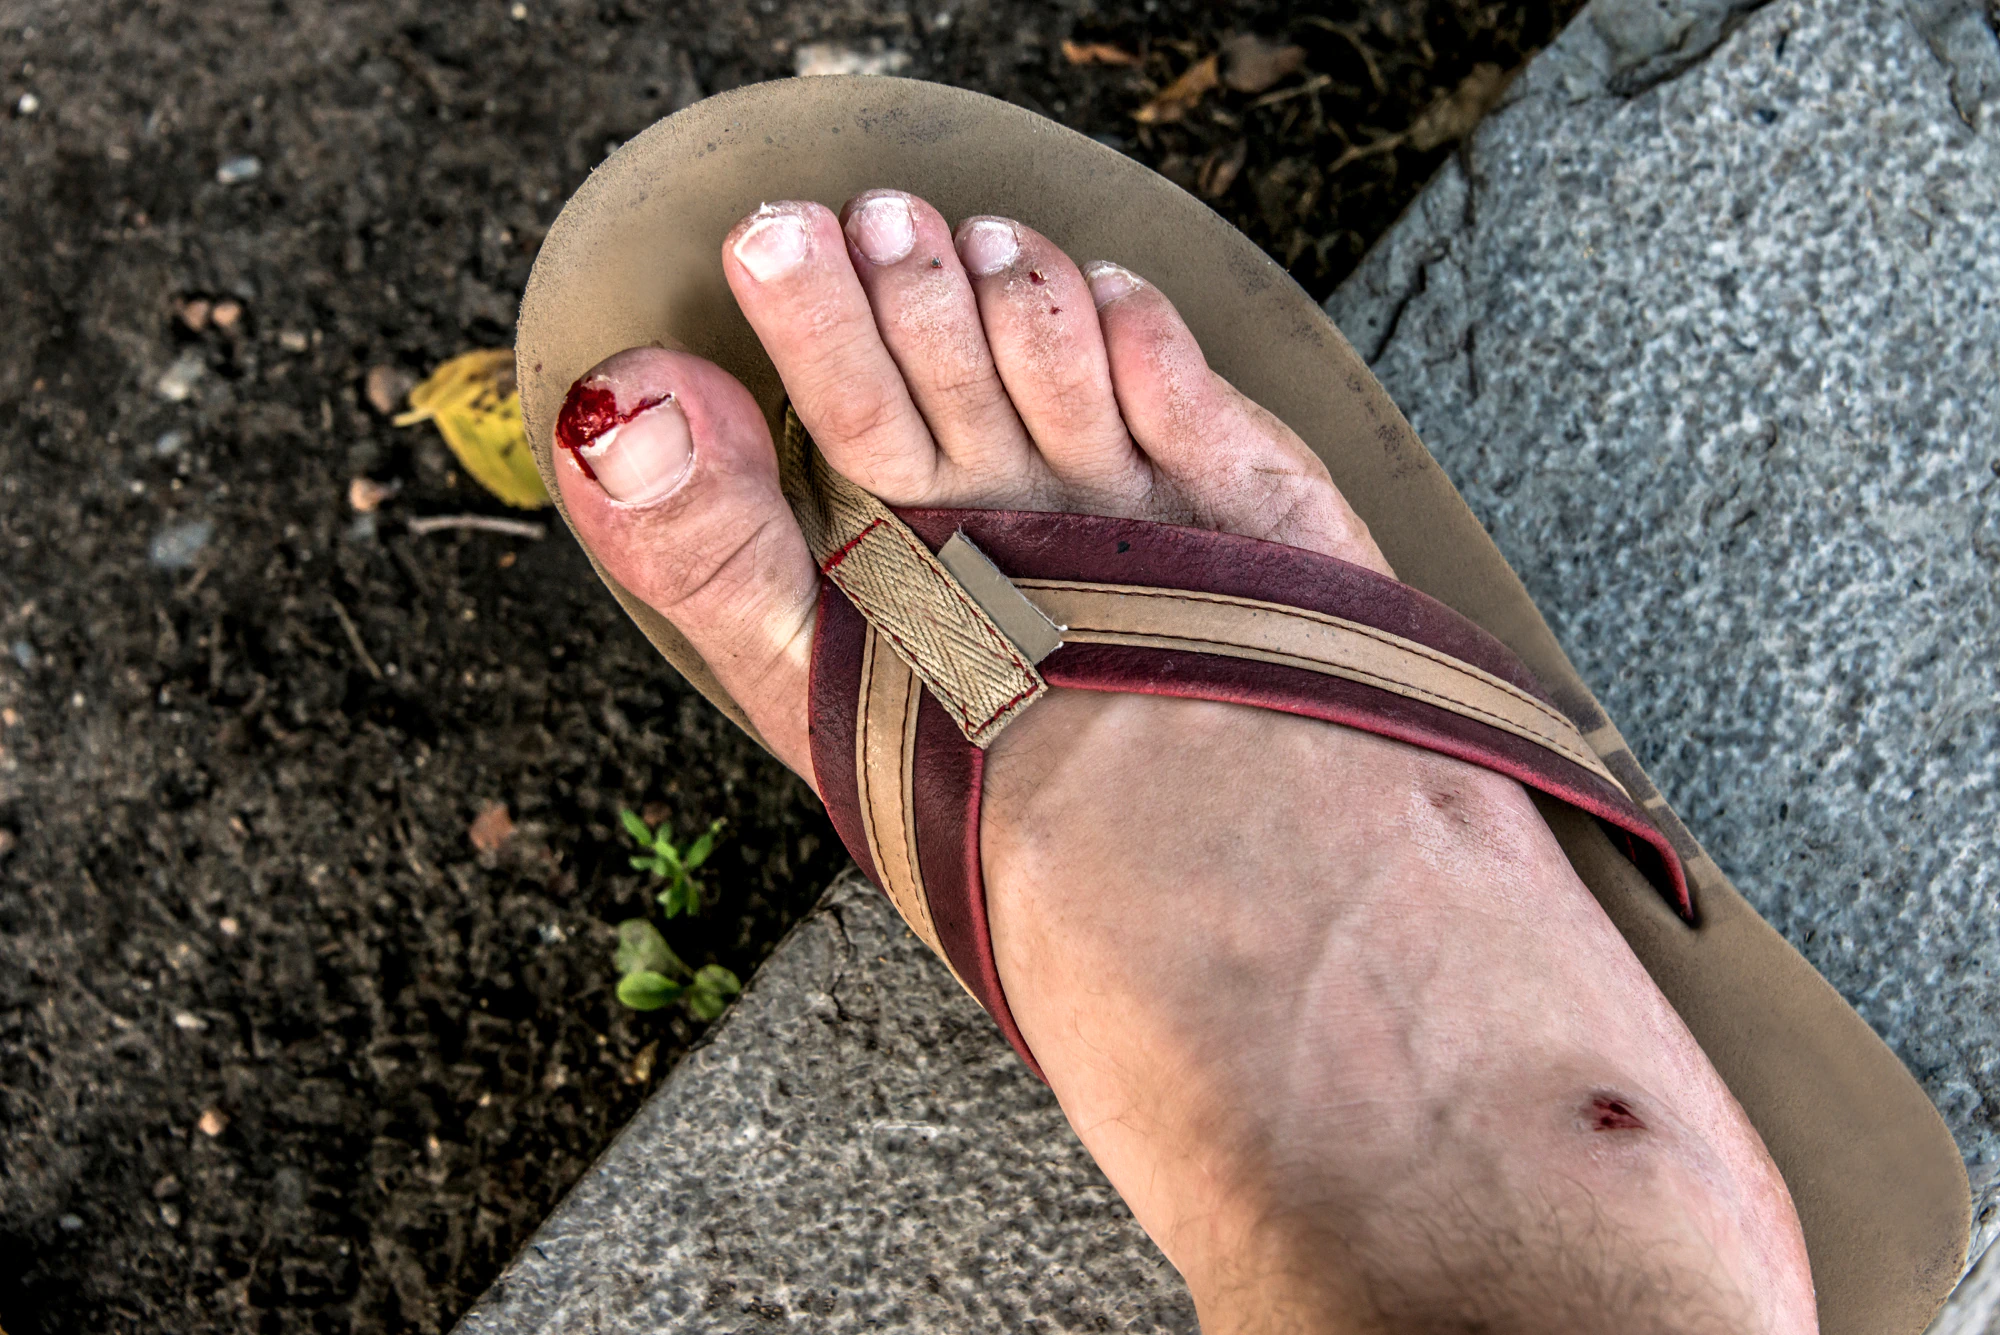 4 Flip-Flop Injuries to Avoid This Summer